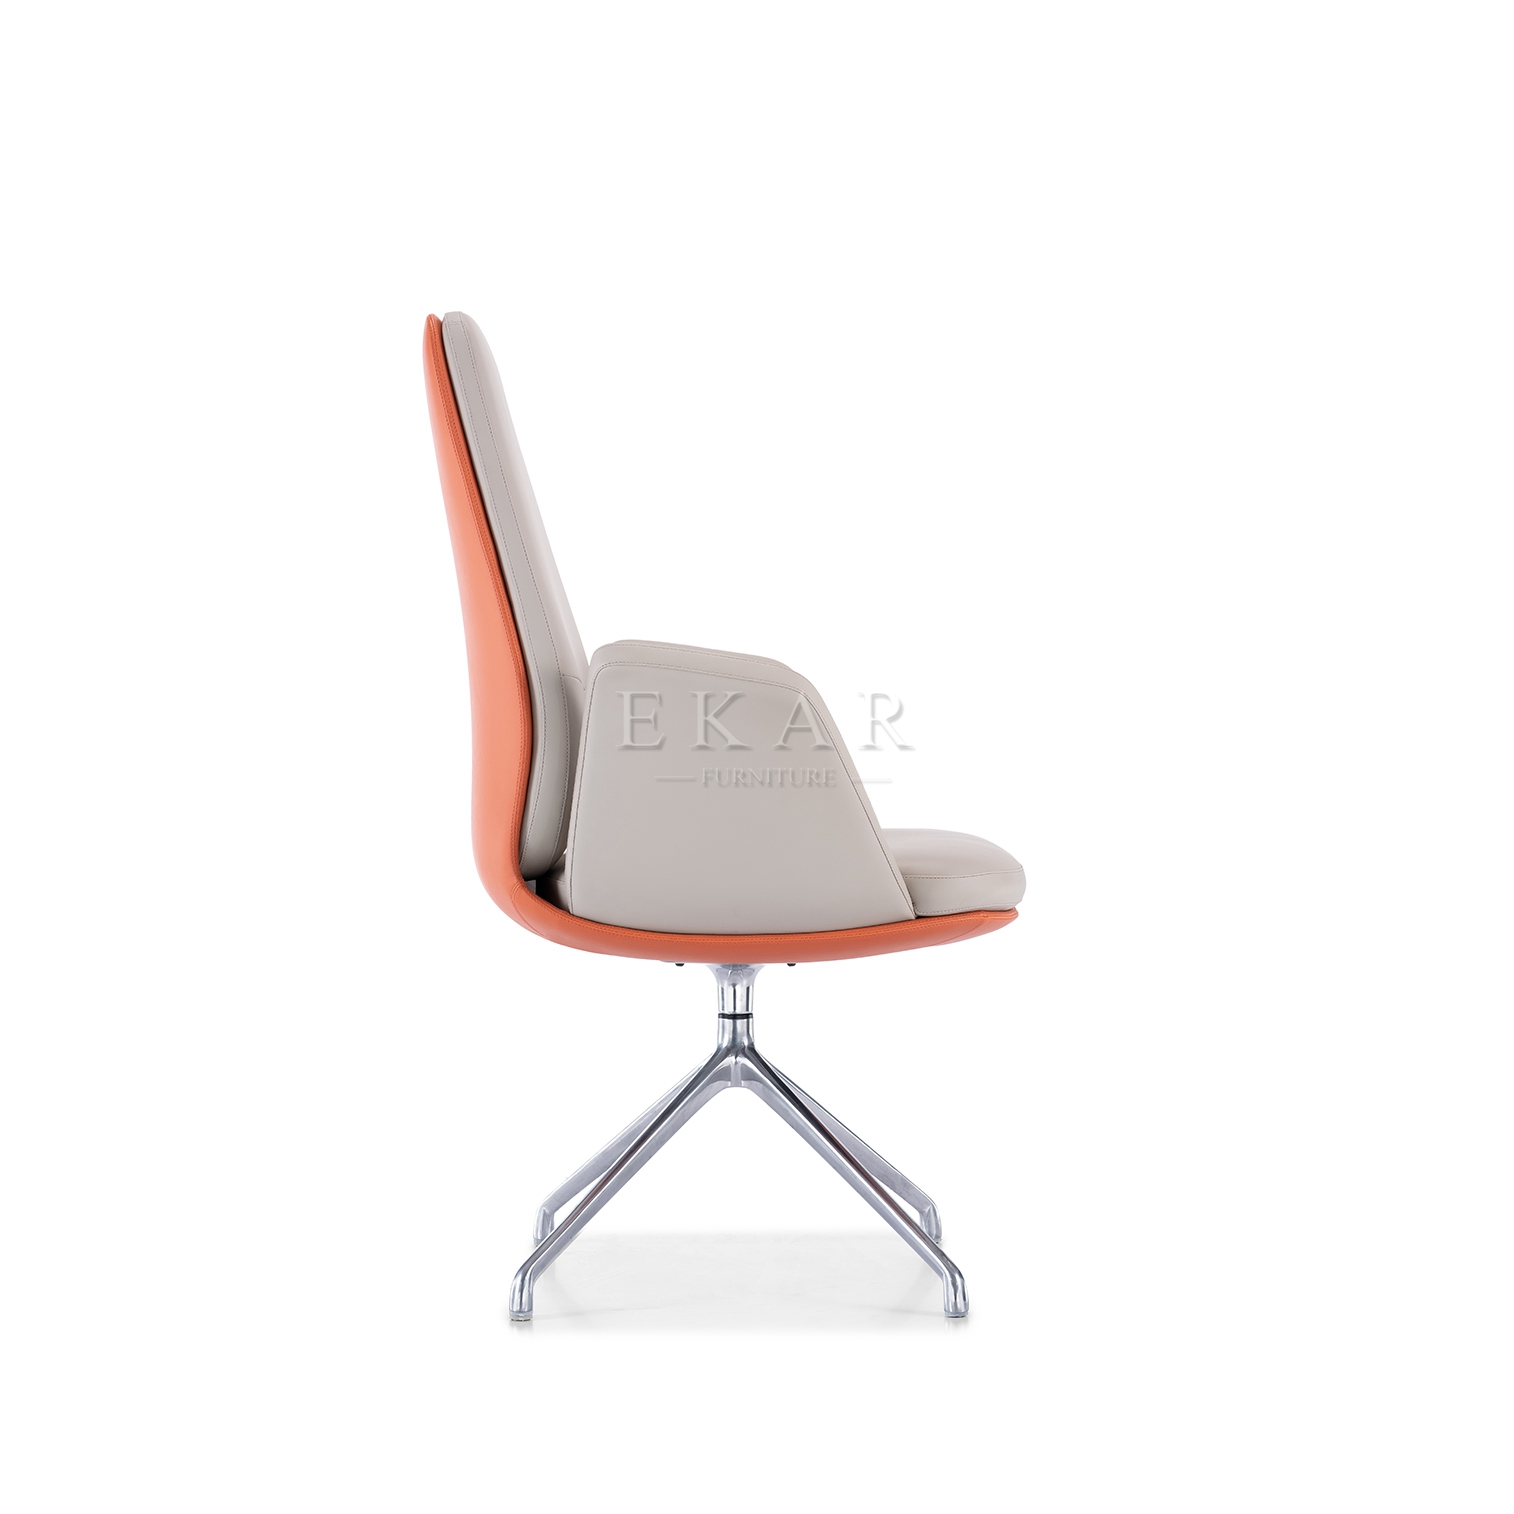 Low back Durable Luxury Conference Office Furniture Ergonomic Modern Leather Office Chair